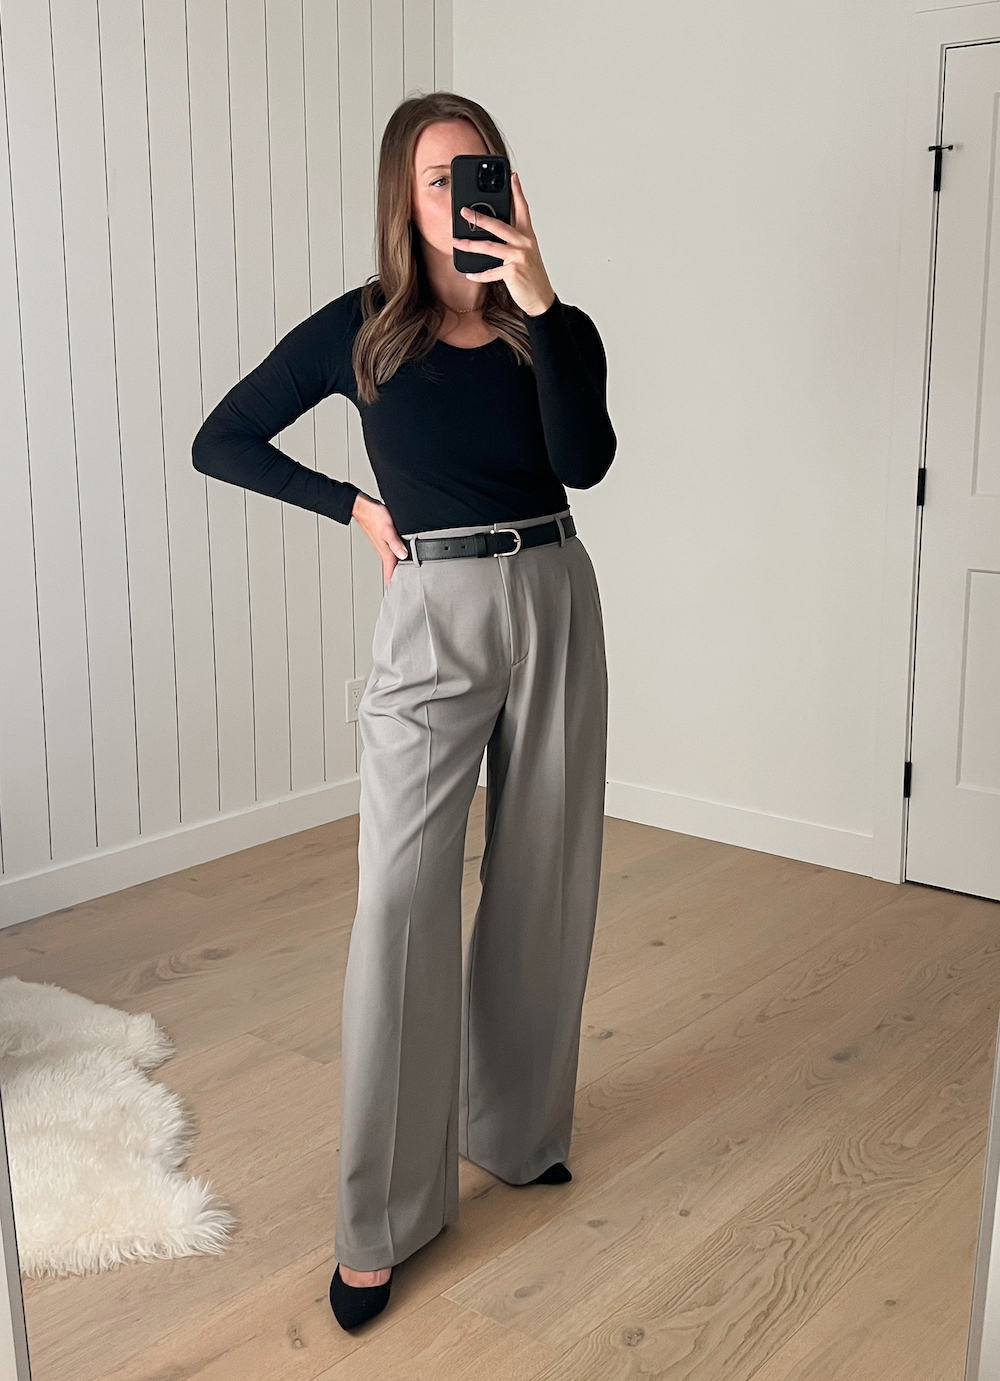 Christal wearing a black long-sleeved top with a pair of grey pleated wide leg pants and black suede pumps